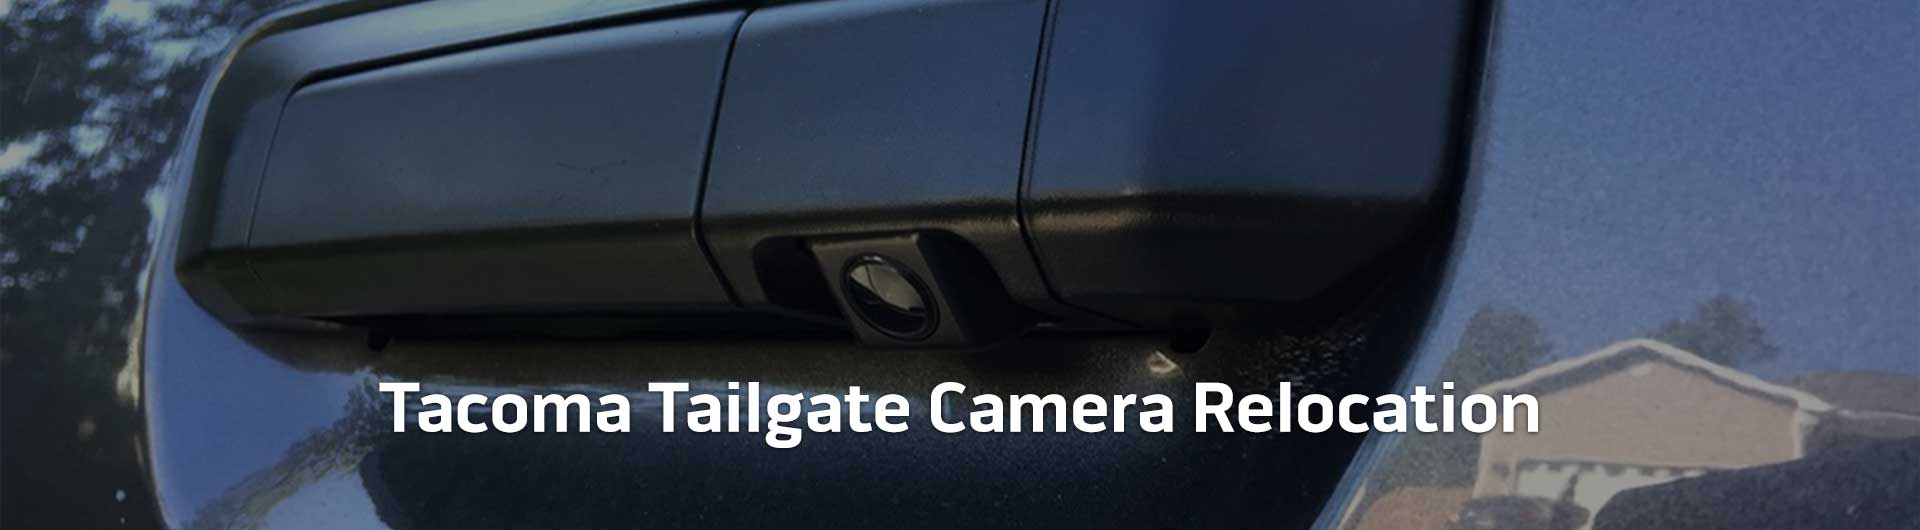 An image showing the tailgate handle of a Toyota Tacoma. The tailgate handle has a backup camera integrated into it. The image has text that reads Toyota Tacoma Tailgate Camera Relocation.